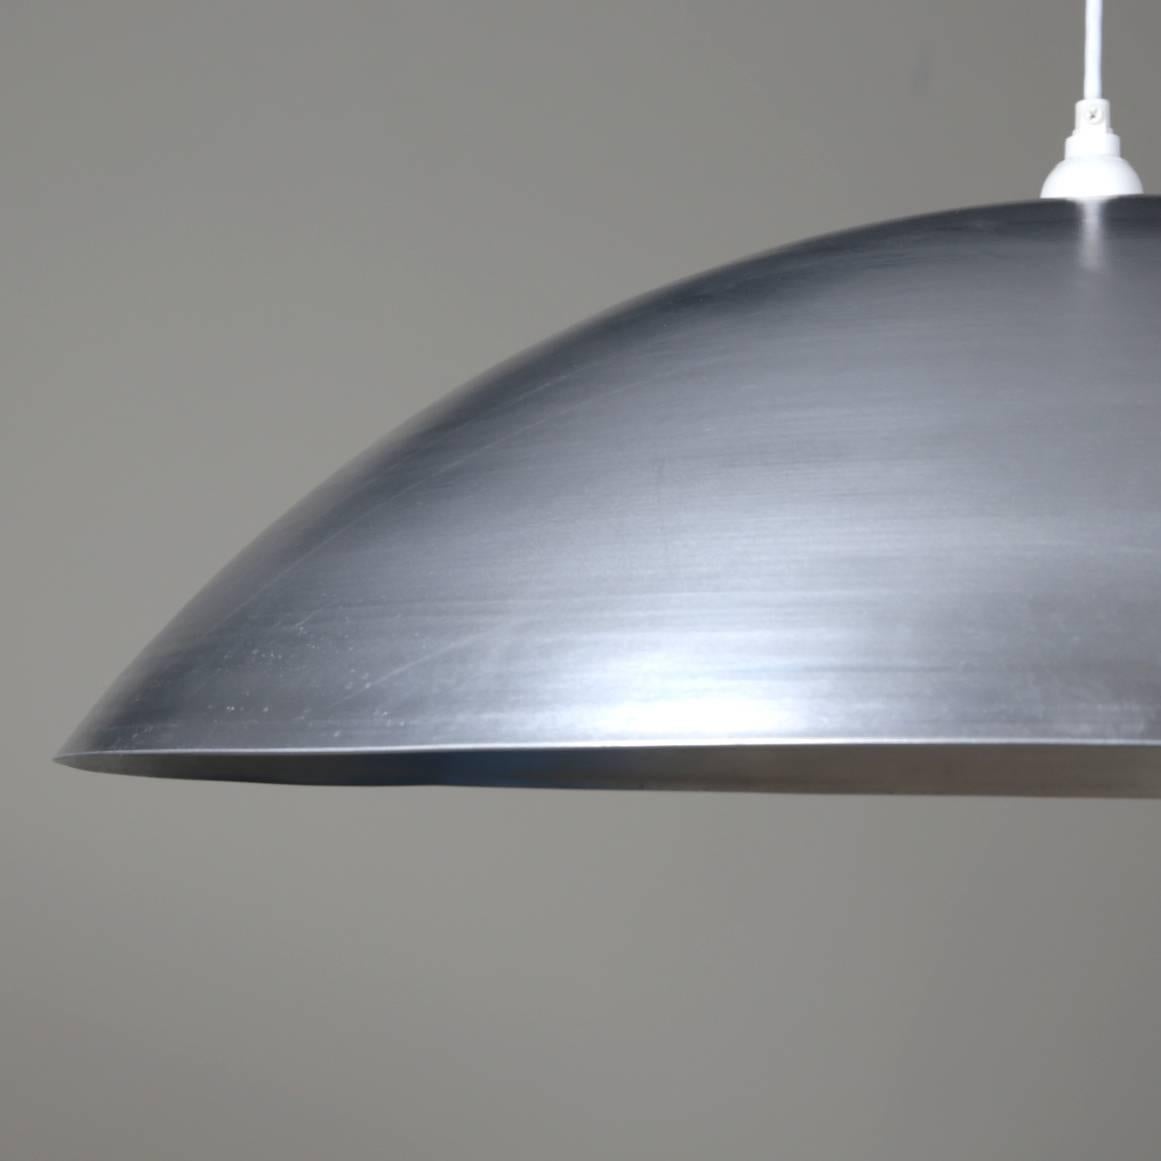 This listing is for 1x industry pendant in waxed aluminum designed and manufactured by RESEARCH Lighting.

Materials: Aluminum
Finish: waxed aluminum
Electronics: 1x E26 Socket, G40 Bulb (included)
Suspension: 5